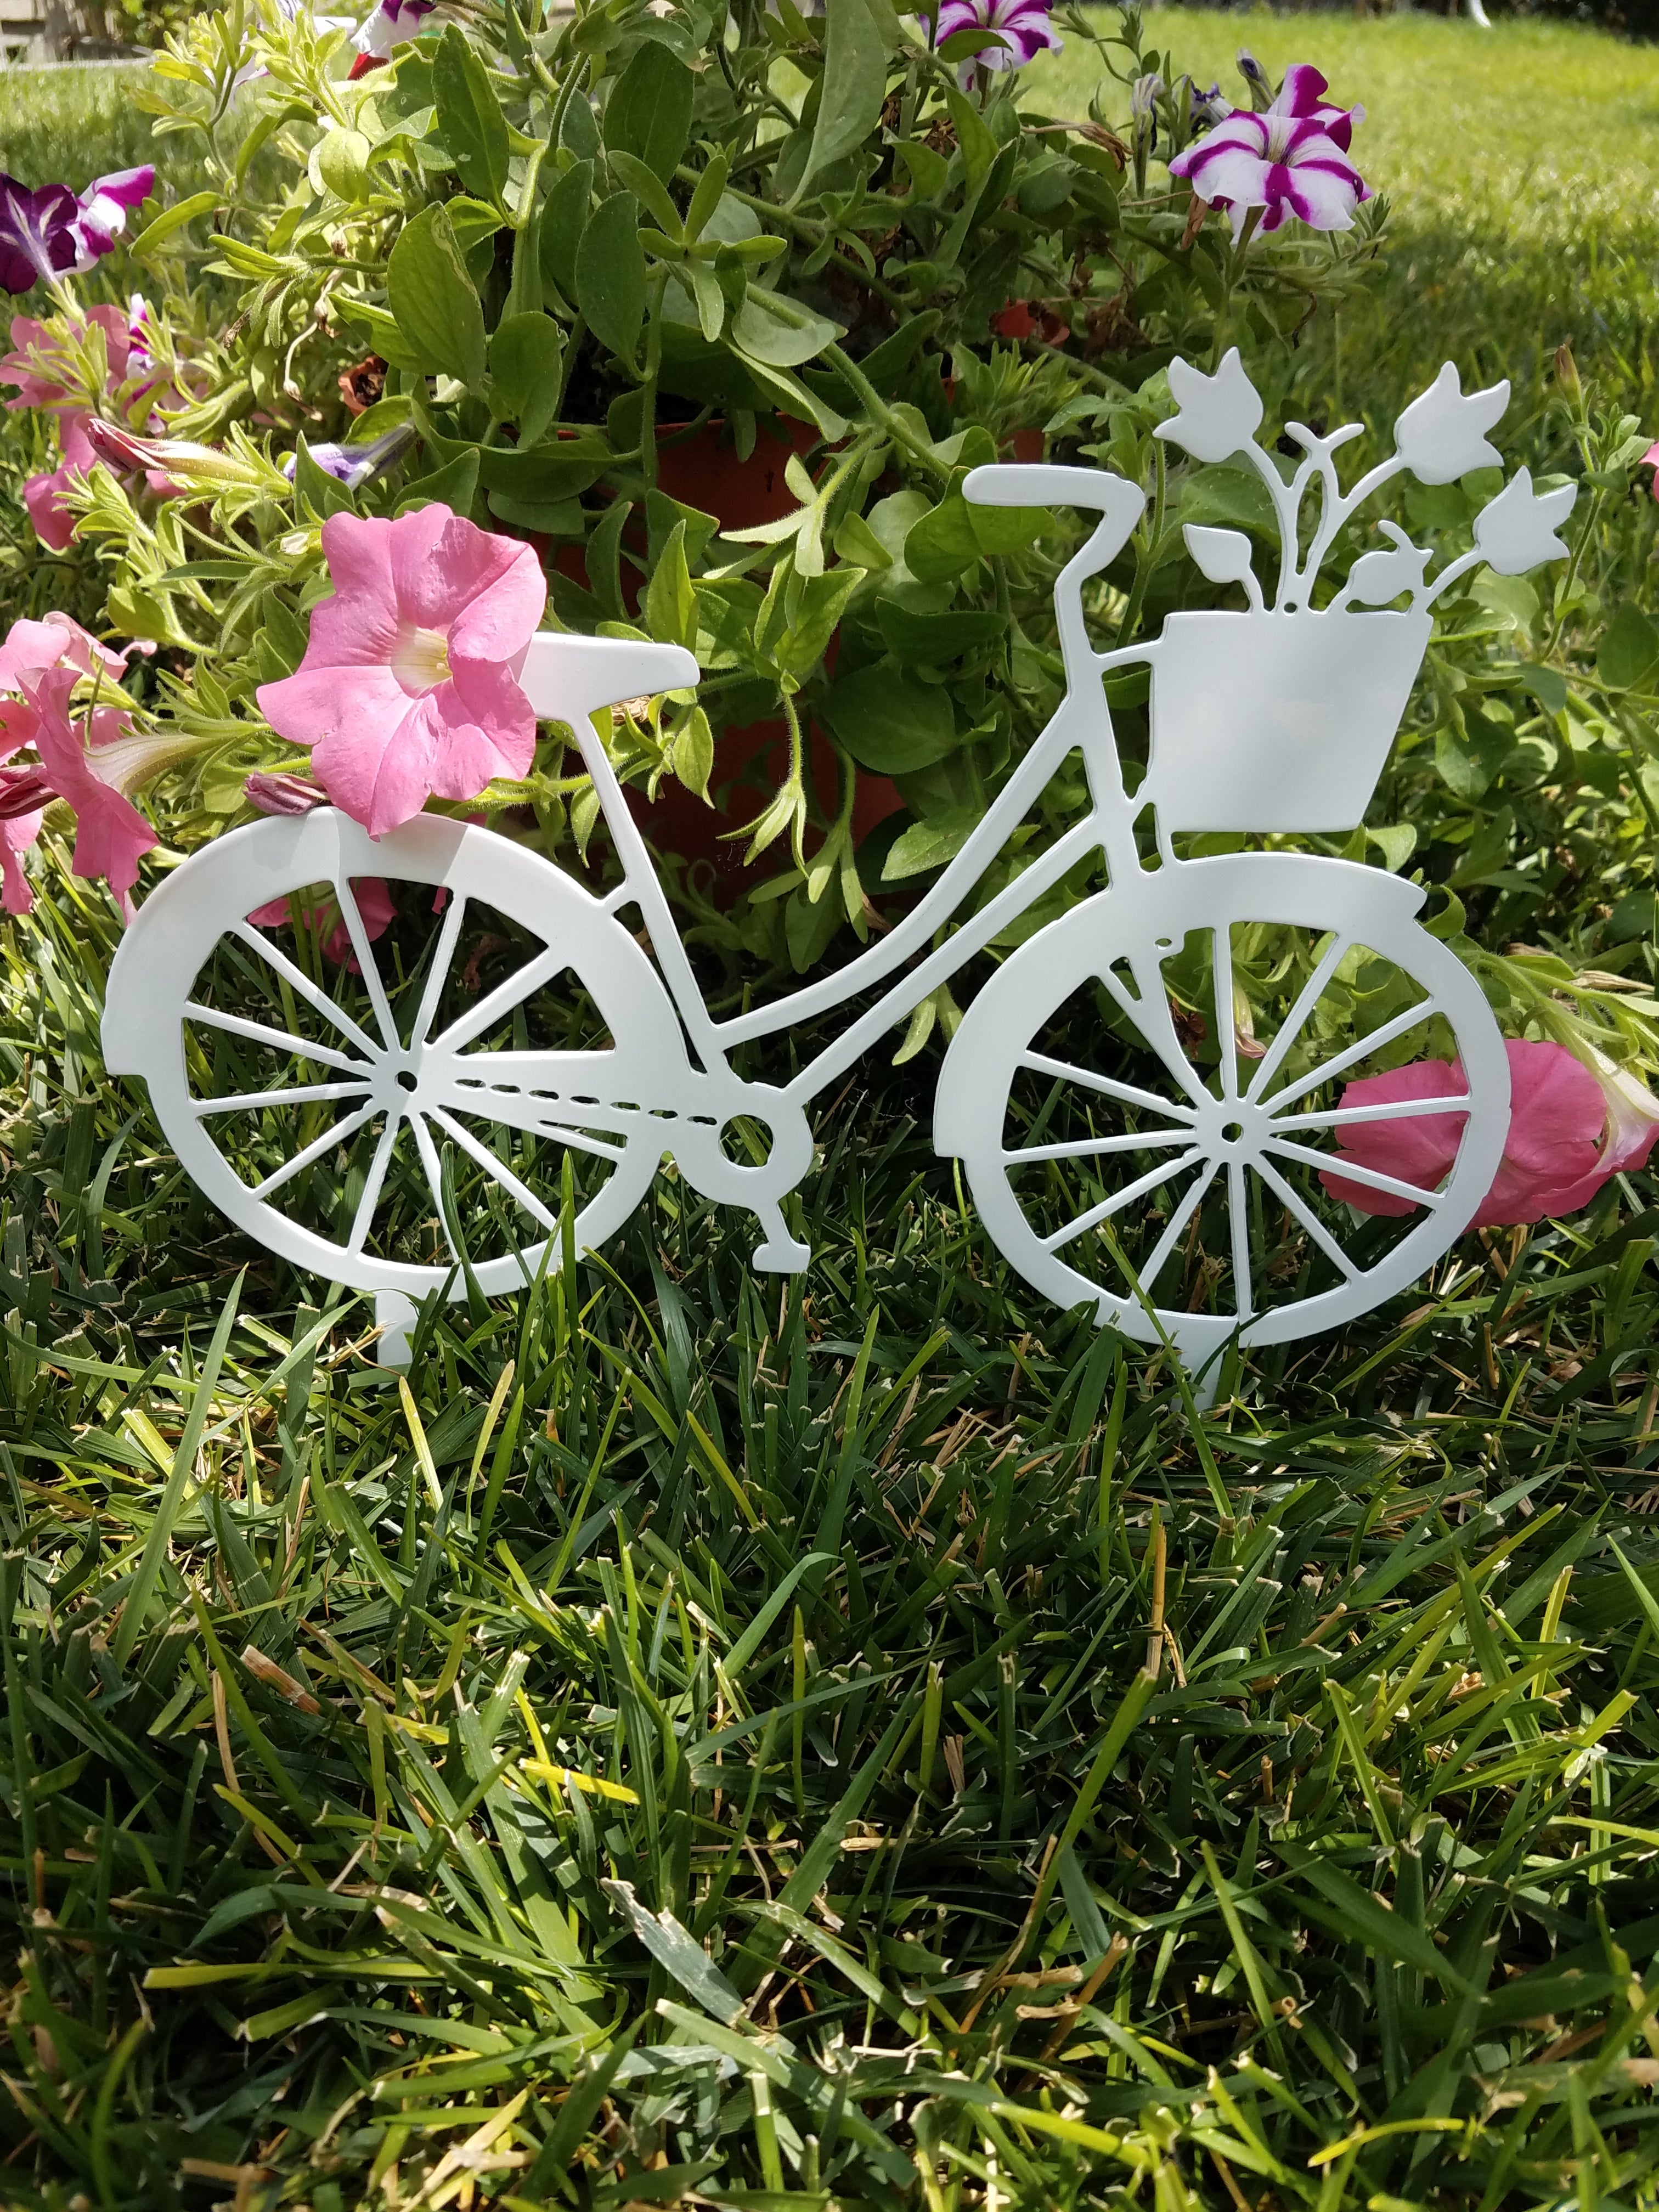 White powder coated bicycle with tulips in basket on stakes in flower bed.